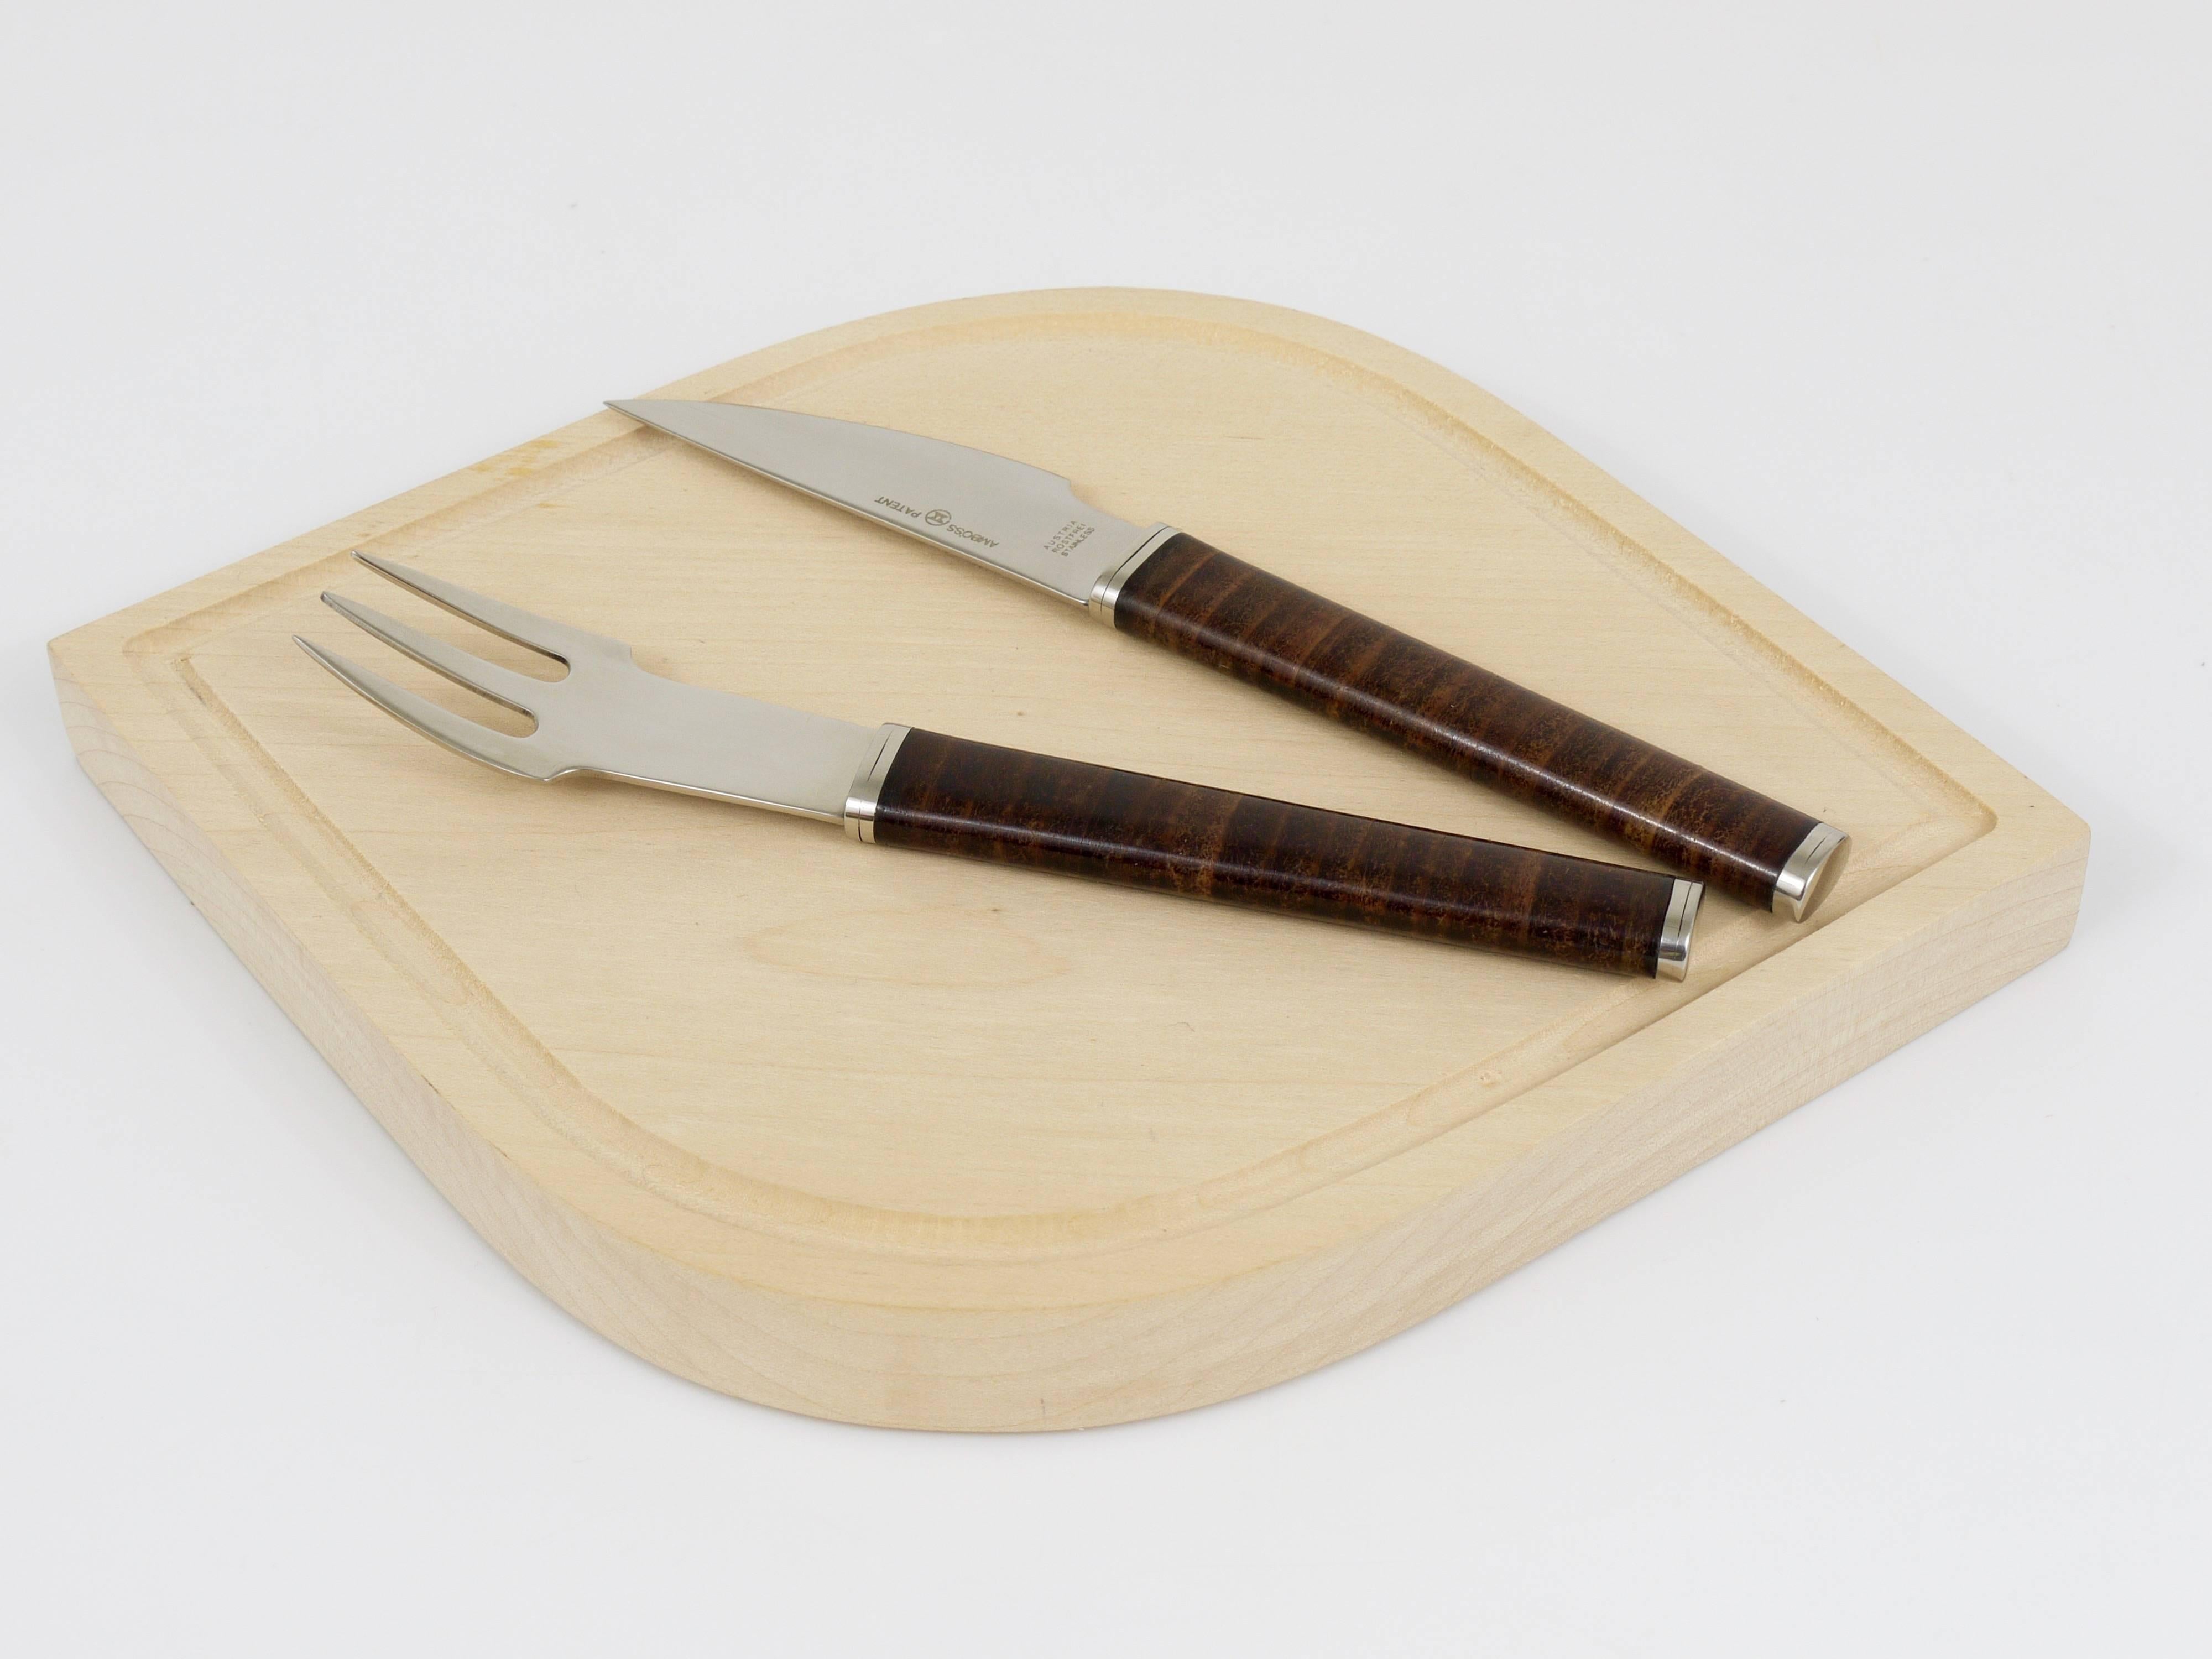 A beautiful Mid Century design snack set, consisting of a fork and knife and a wooden board, designed by János Megyik. Executed by Amboss Austria, who collaborated with a lot of Austrian designers and architects, like Carl Aubock. The flatware is